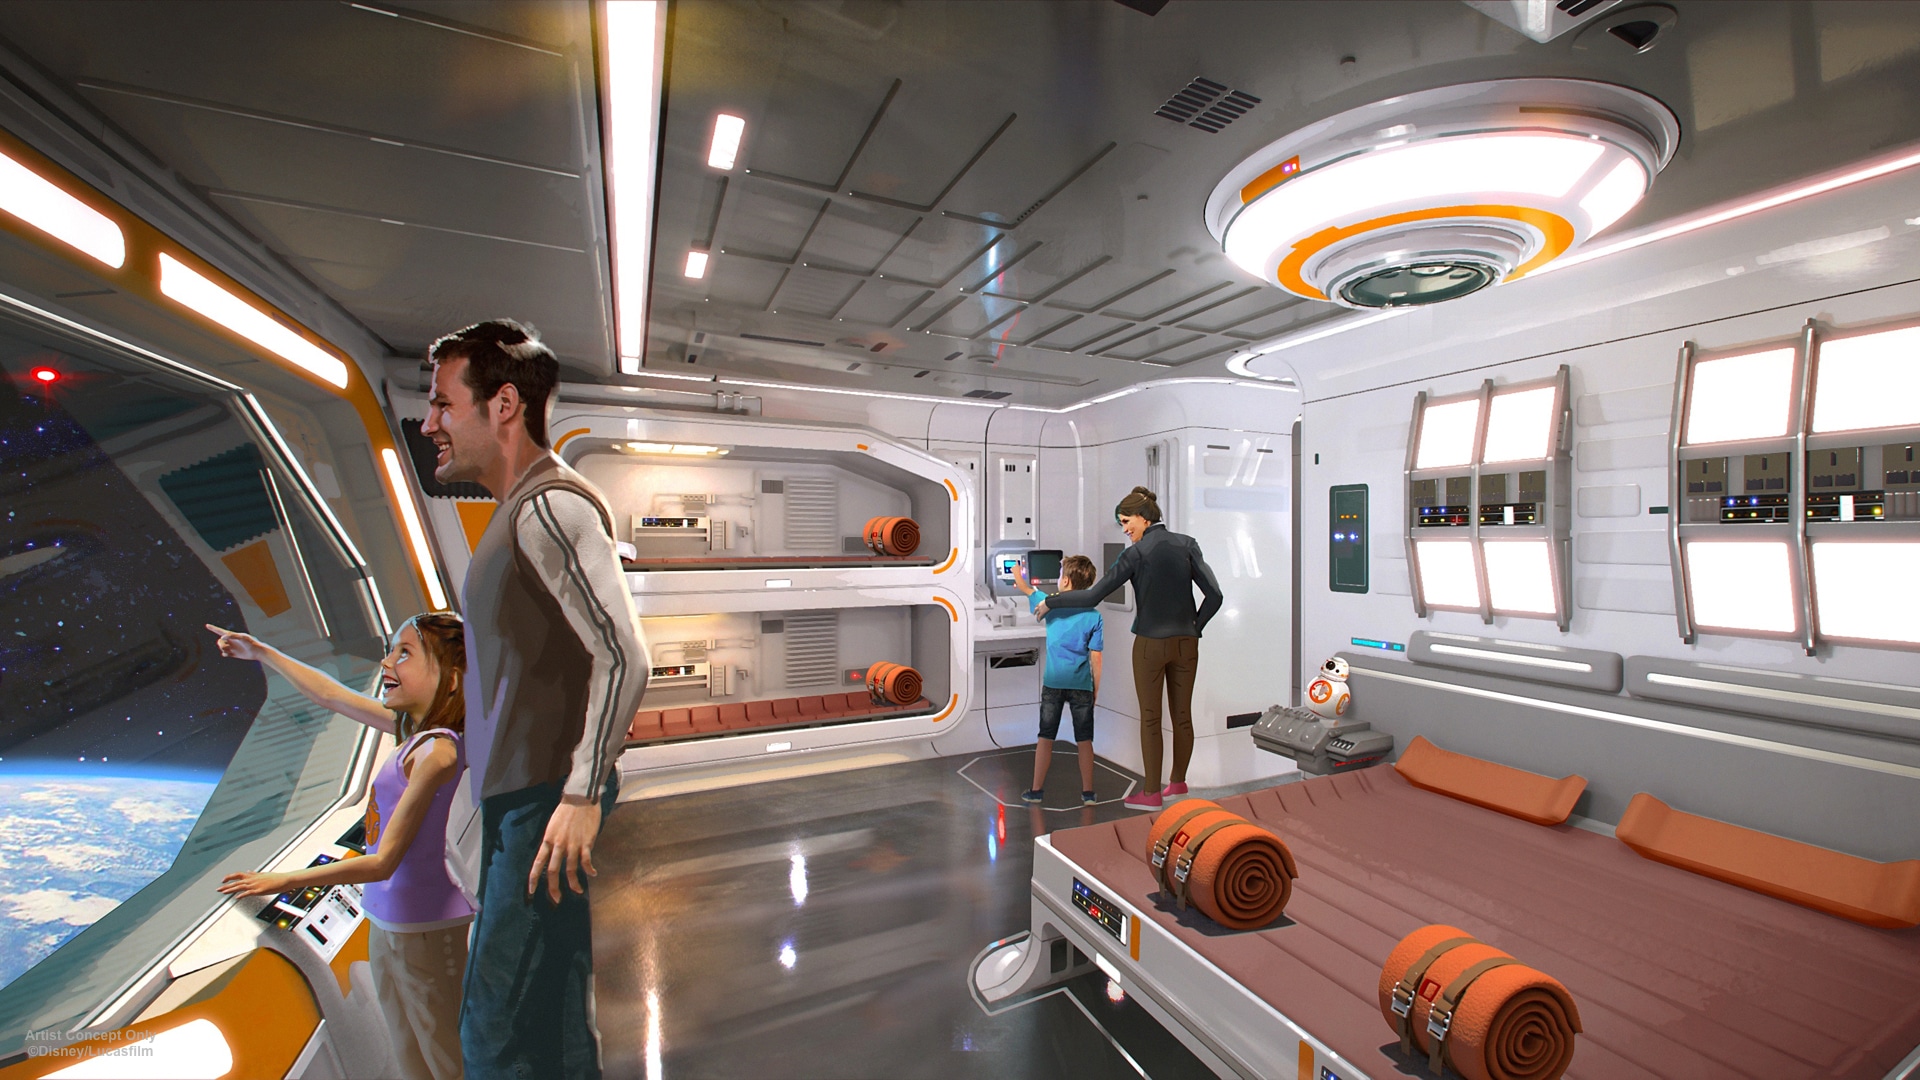 A Disney Star Wars hotel with a view in to space